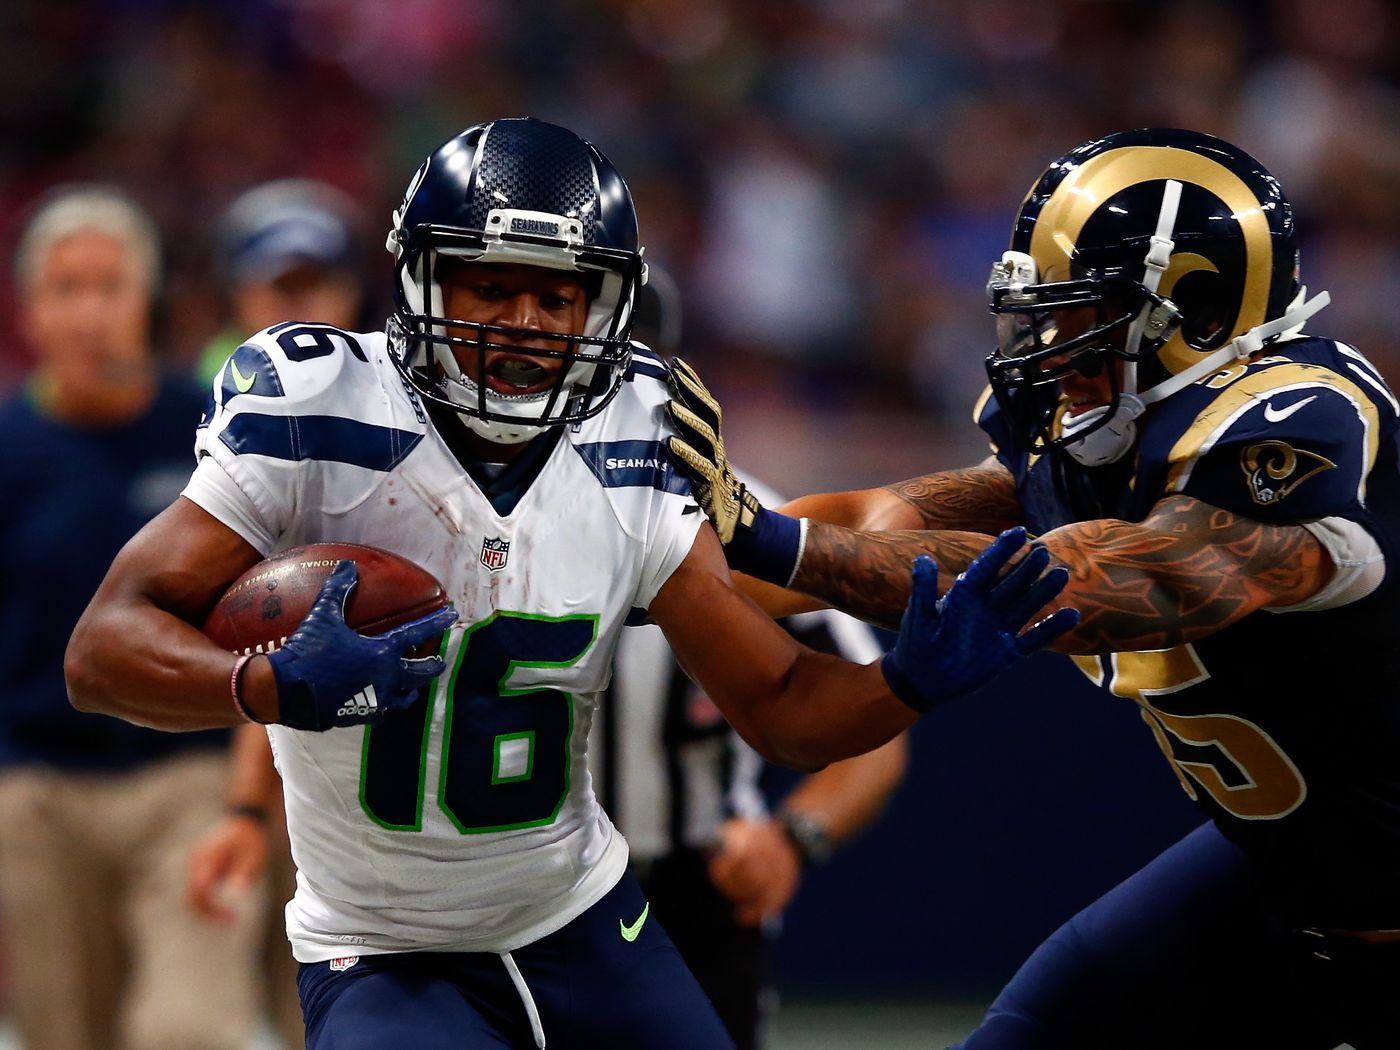 Seahawks Game Today: Seahawks vs Steelers injury report, schedule, live  Stream, TV channel and betting preview for week 6